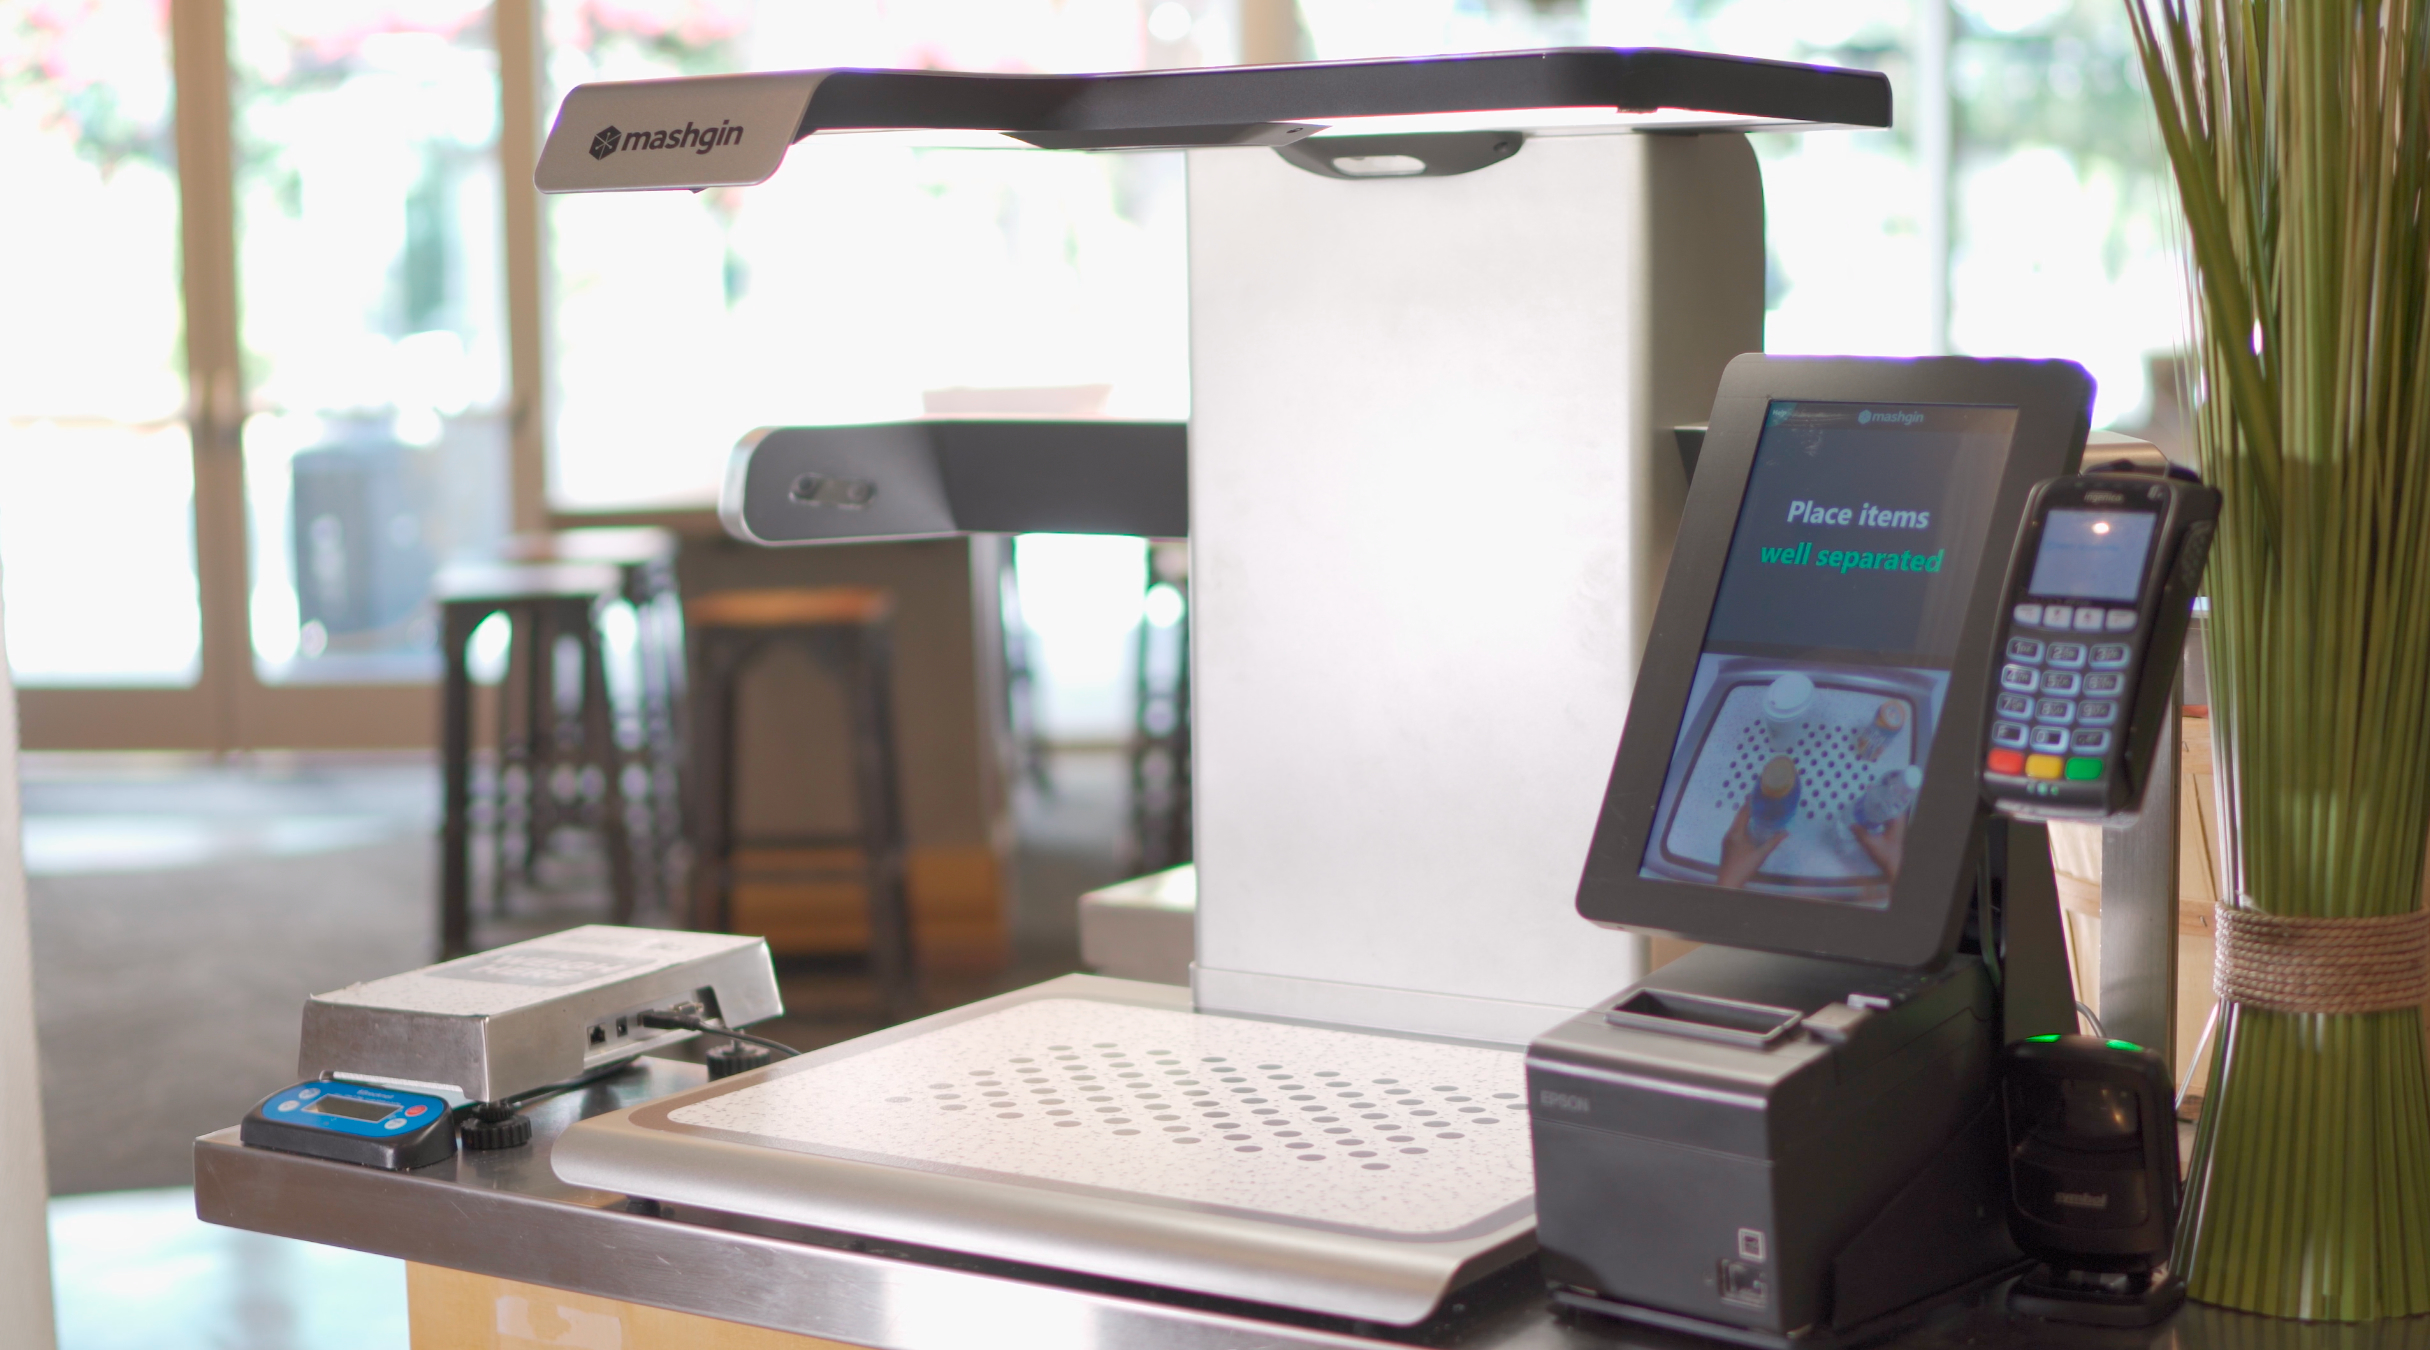 Mashgin Kiosk with new multi-tray checkout functionality and the first deployment of computer vision-powered self-checkout terminals at a ski and snowboard resort destination.